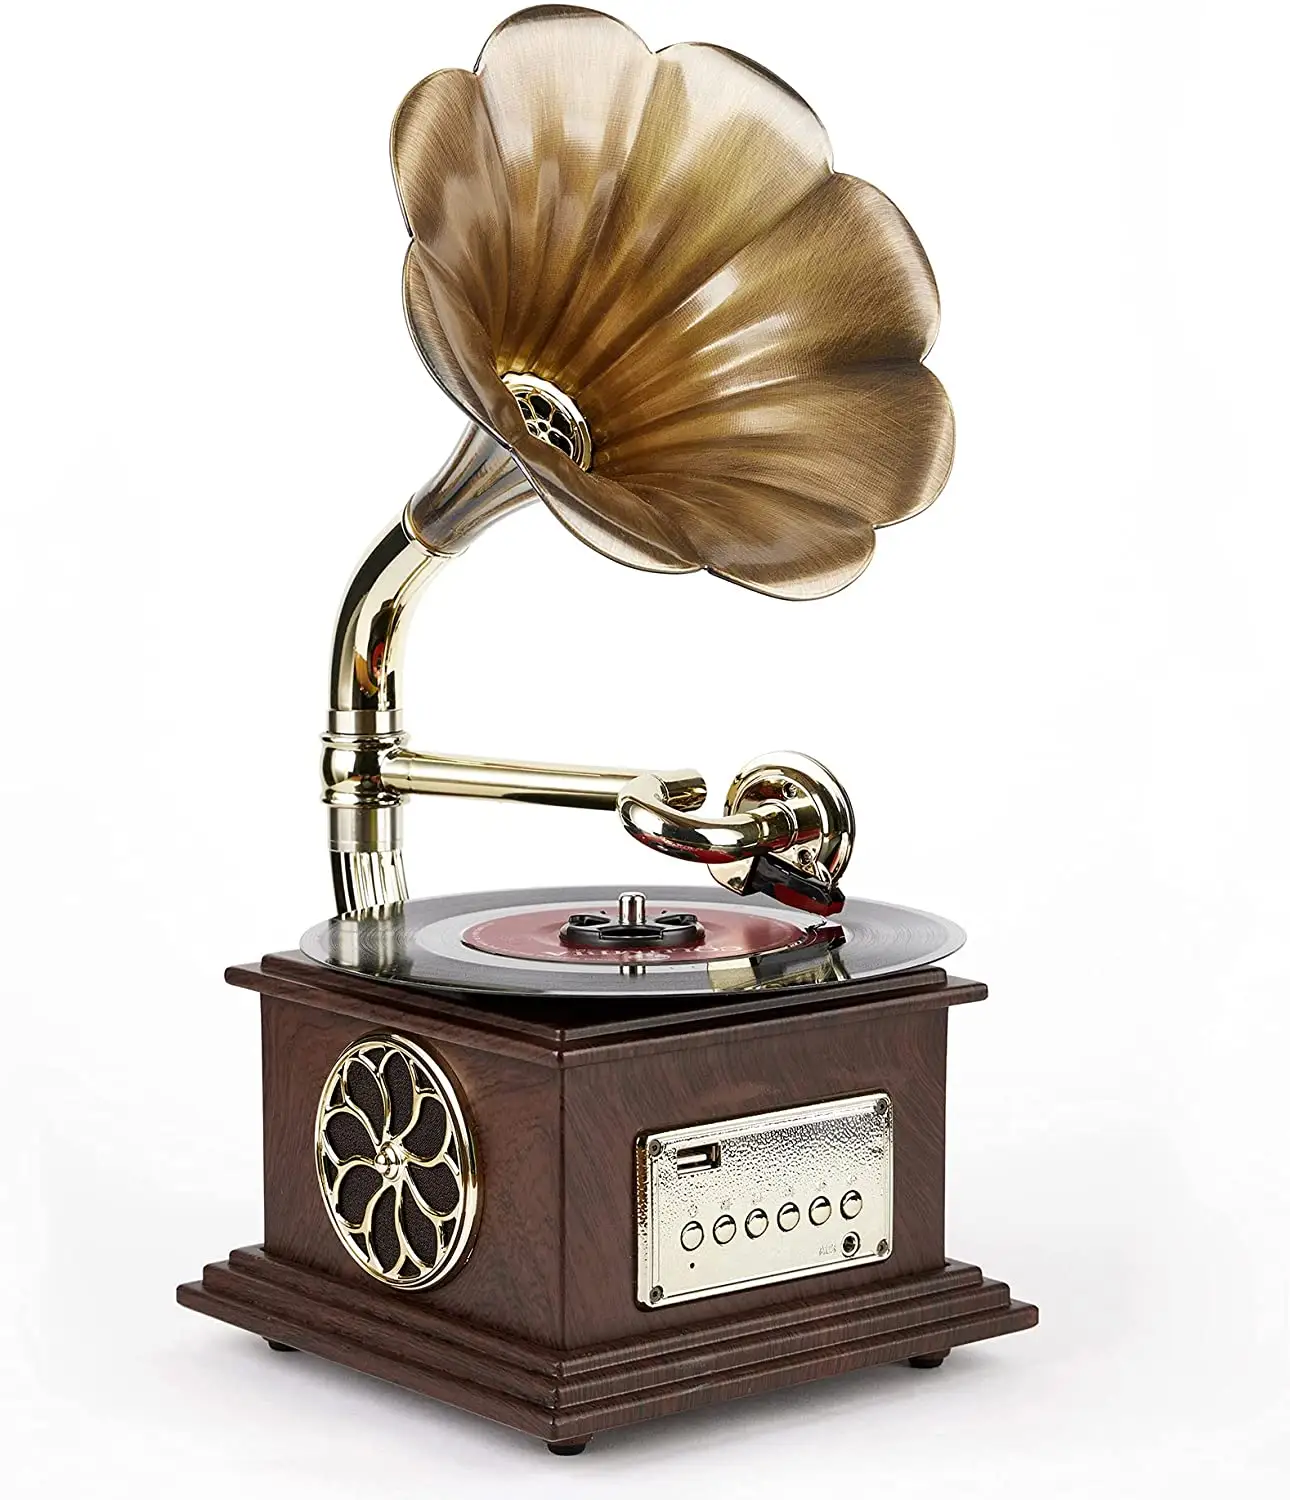 Gramophone Record Player Retro Turntable All in One Vintage Phonograph Nostalgic for LP with Copper Horn Built-in Speaker